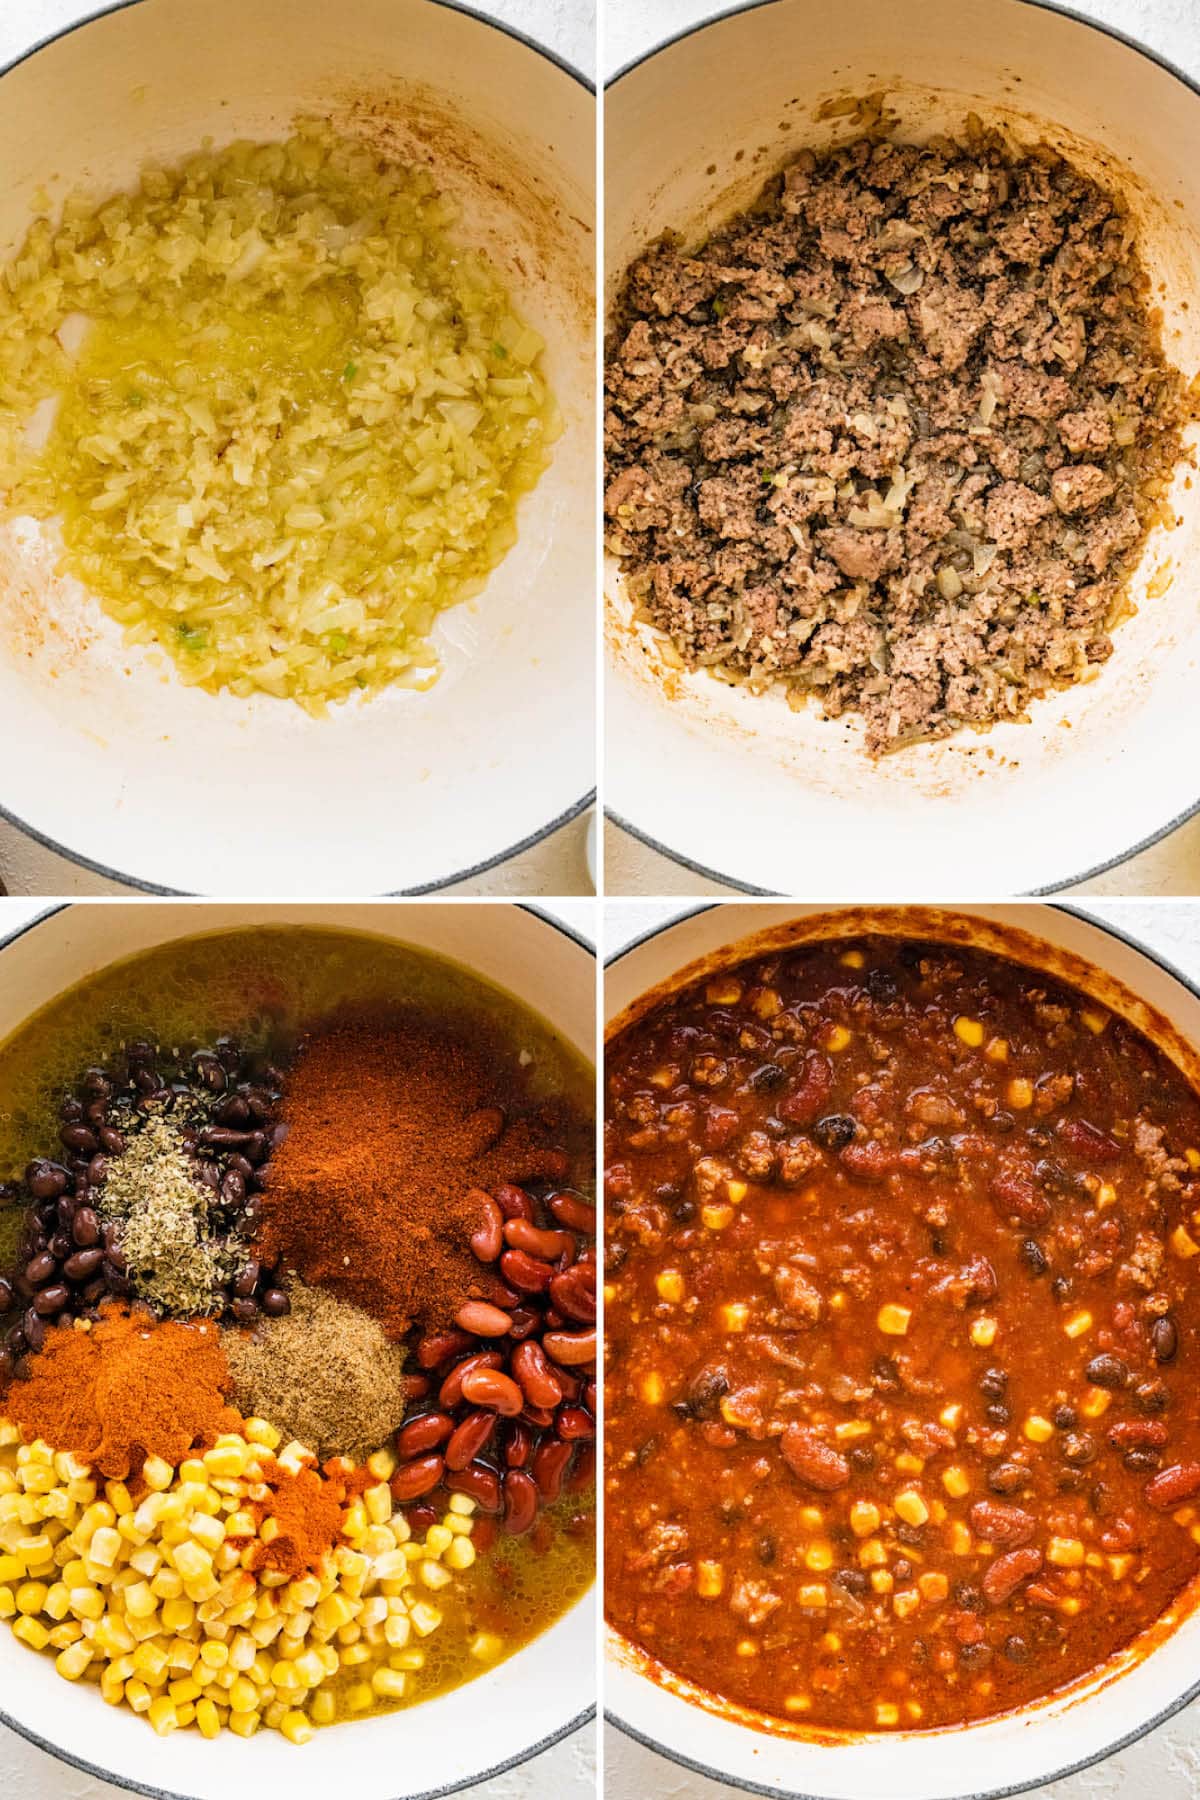 Collage of four photos showing the process to making Turkey Chili in a pot. Cooking the onion, turkey, adding the broth, tomatoes, spices and beans, and then simmering together.